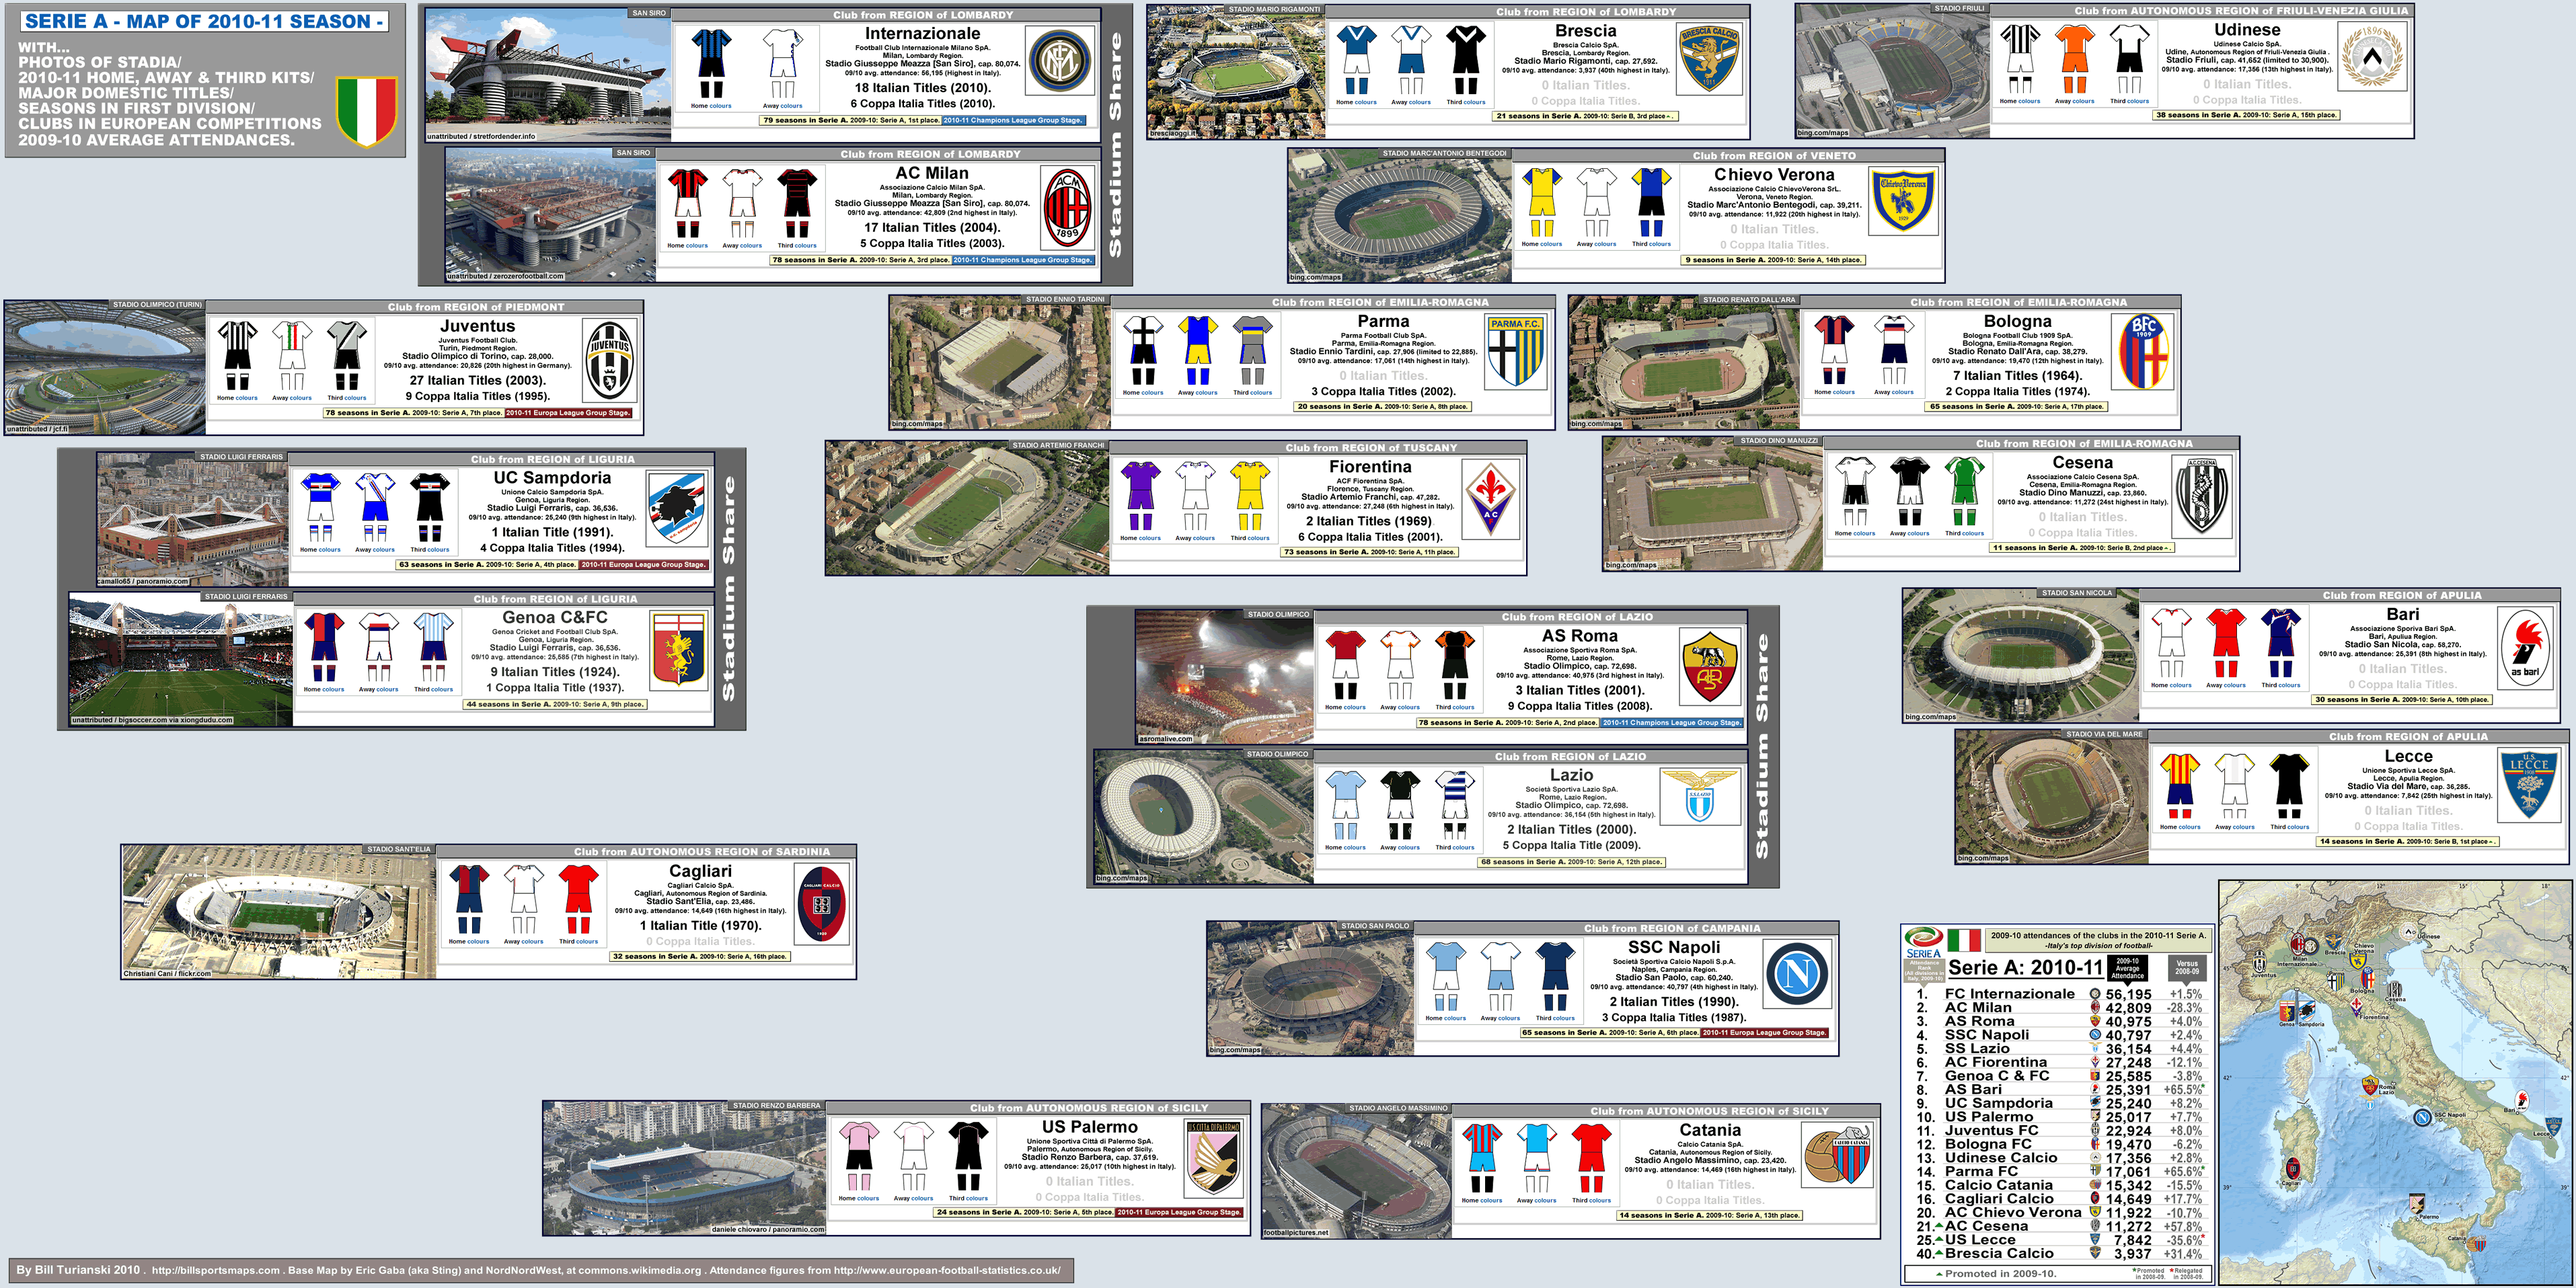 Serie A Map